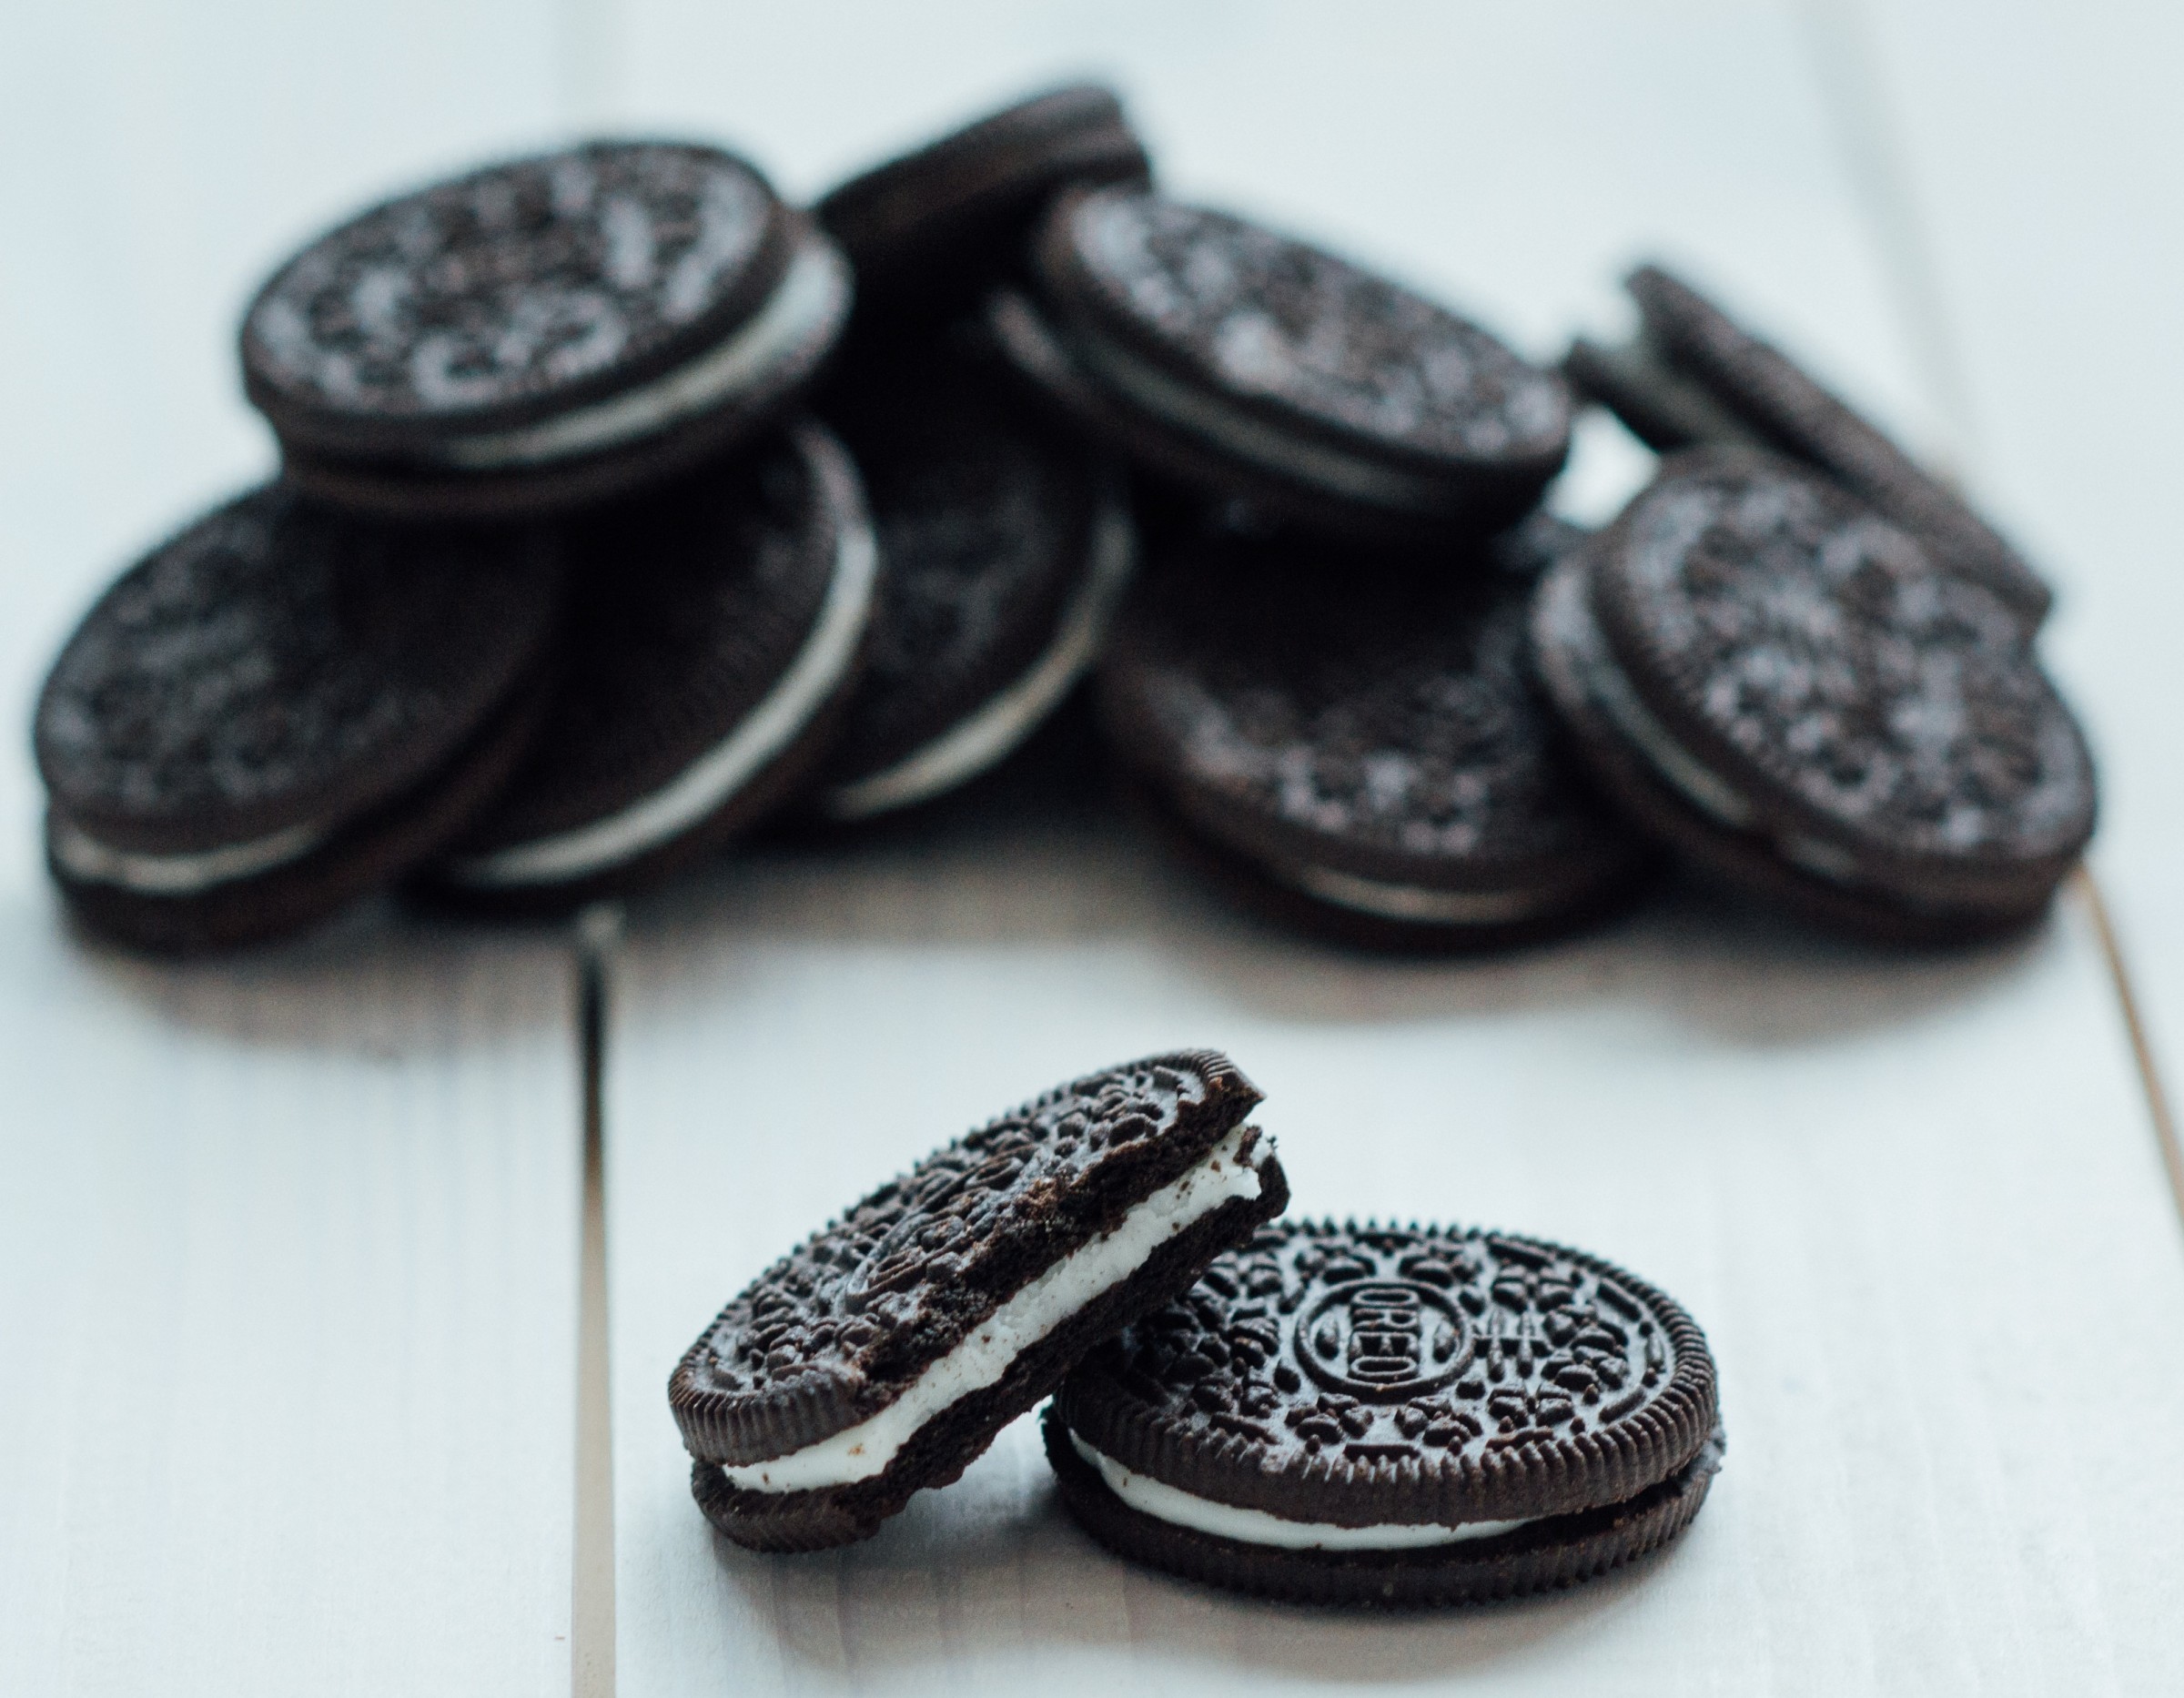 Oreo, Biscuit, Chocolate, Cream, Cookie, Dessert - Small Oreo , HD Wallpaper & Backgrounds